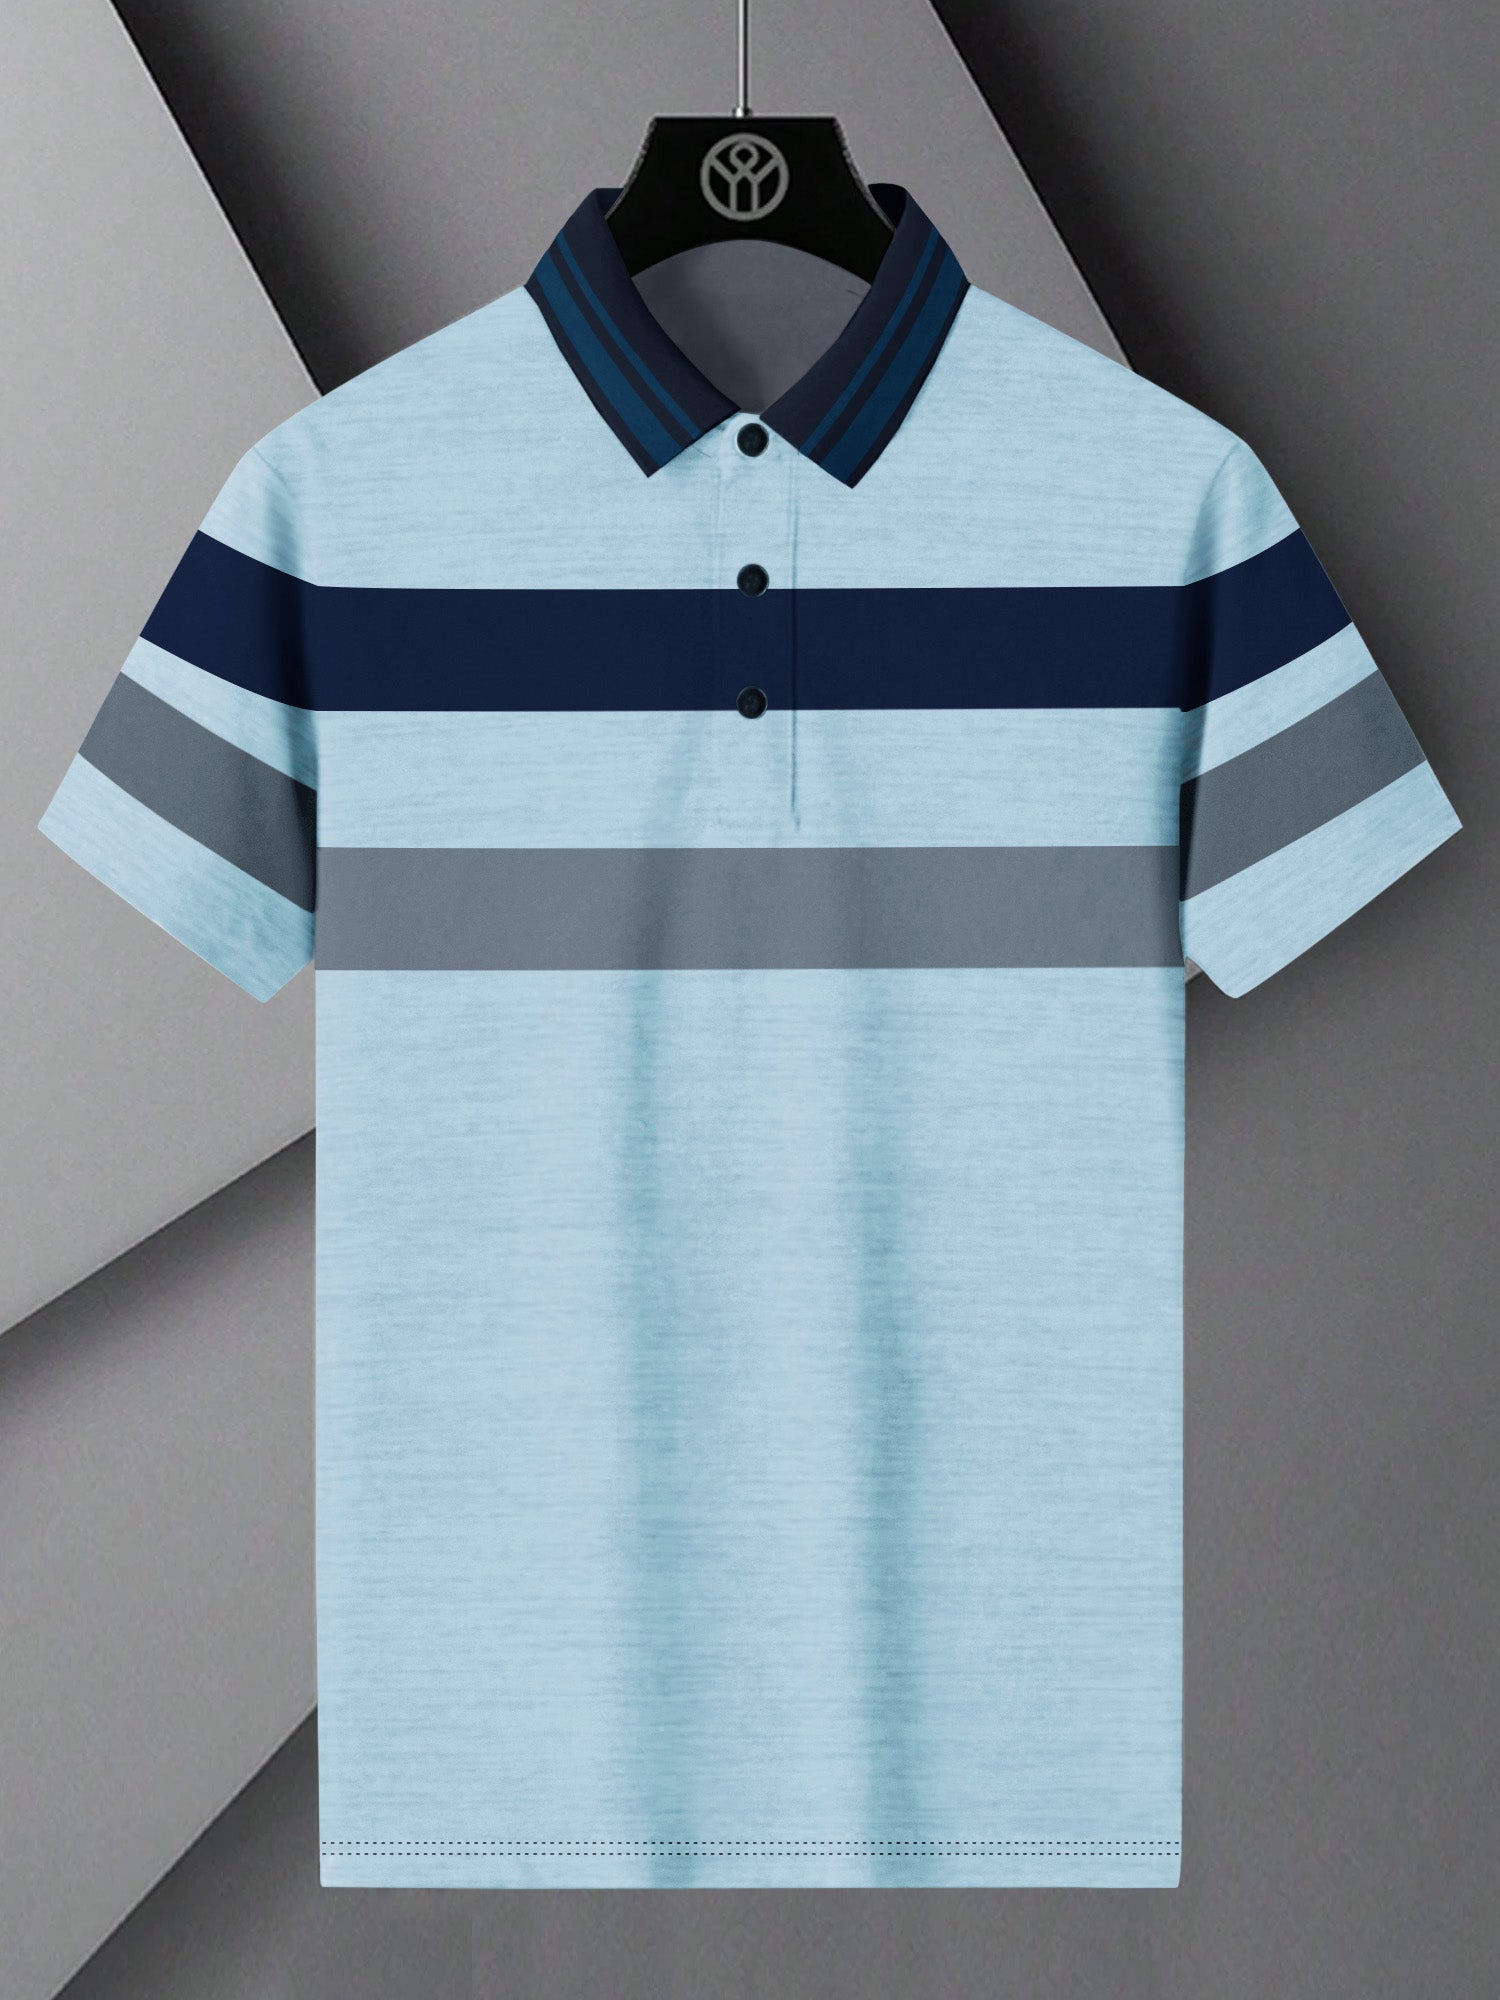 NXT Summer Polo Shirt For Men-Sky Melange with Grey & Navy Stripe-BE725/BR12977